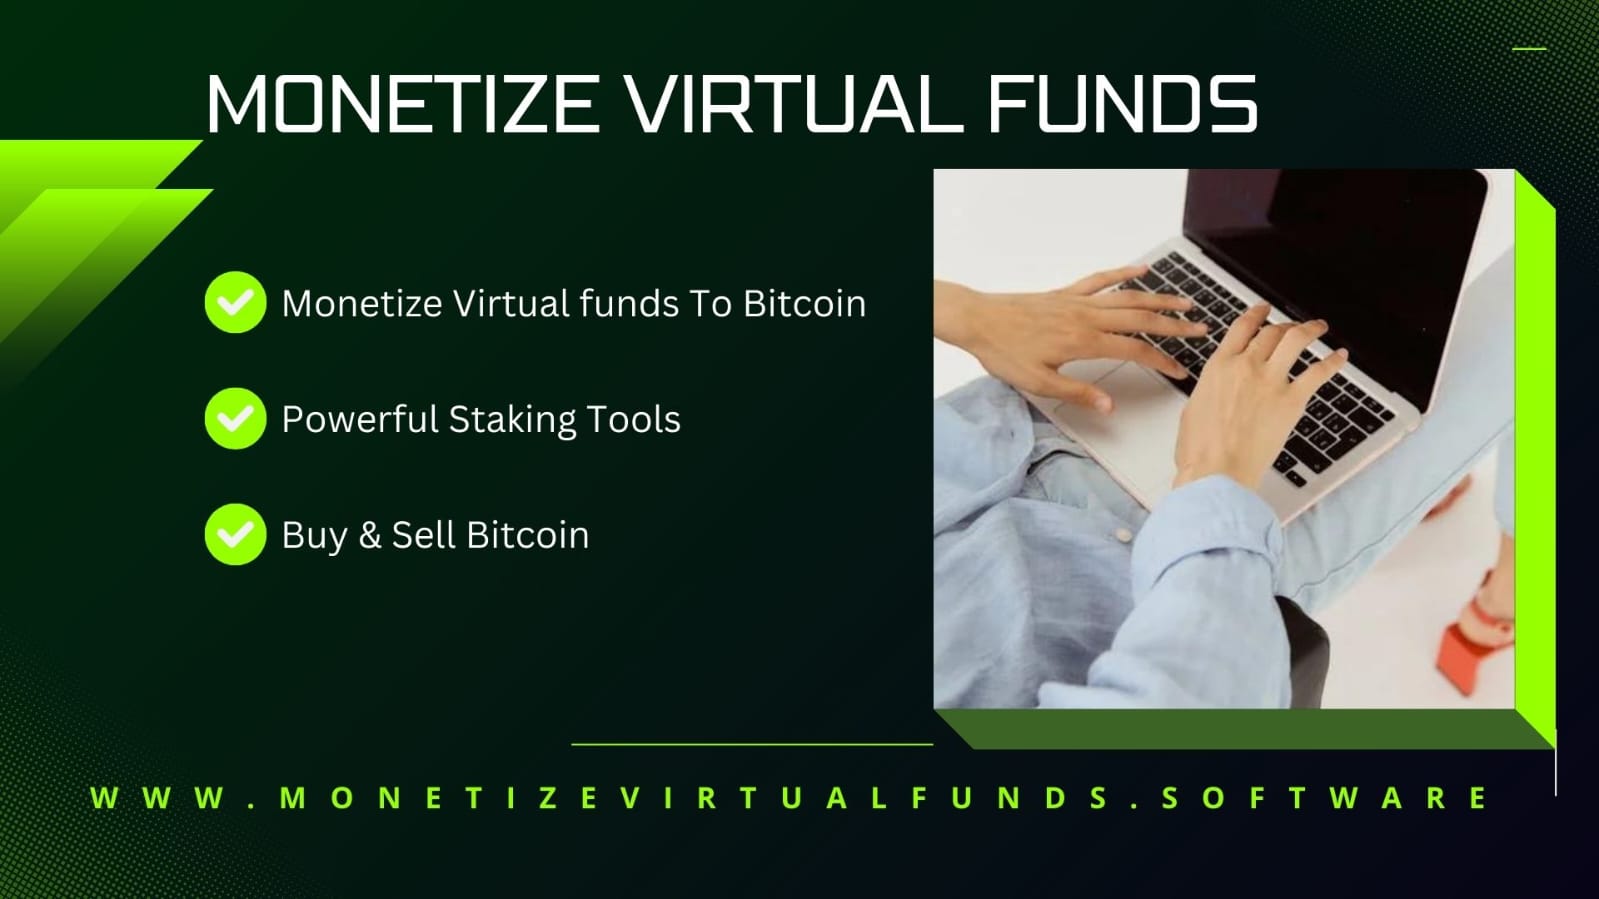 monetize-wirtual-funds-to-bitcoin-with-powerful-staking-odds